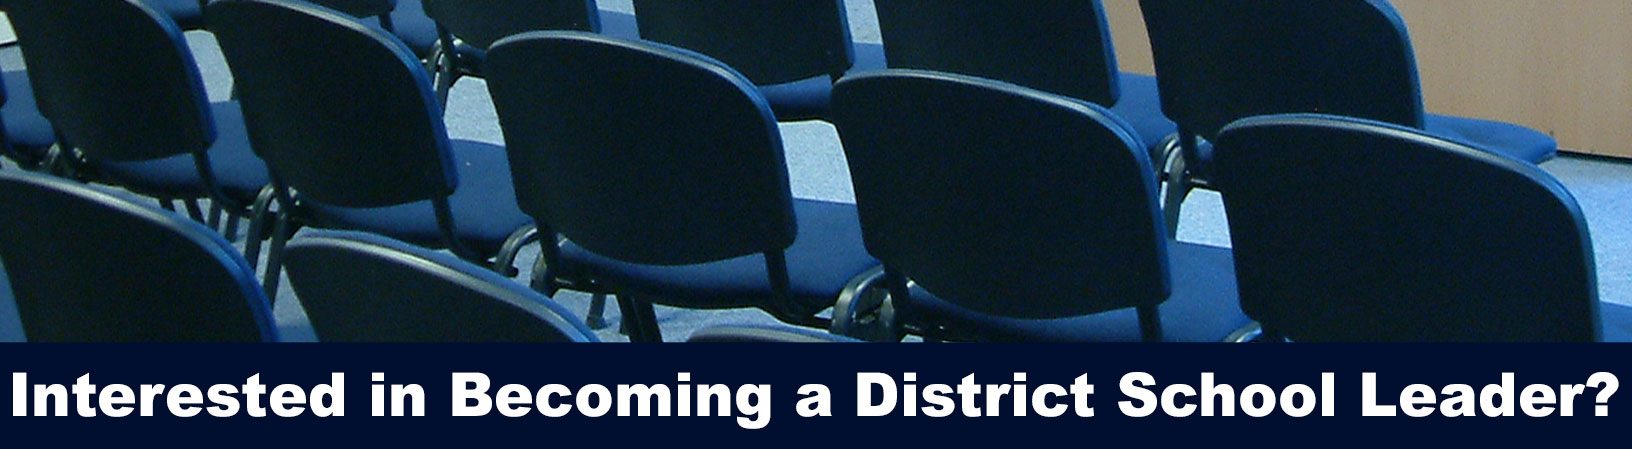 Empty chairs. Text reads: Interested in Becoming a District School Leaders?